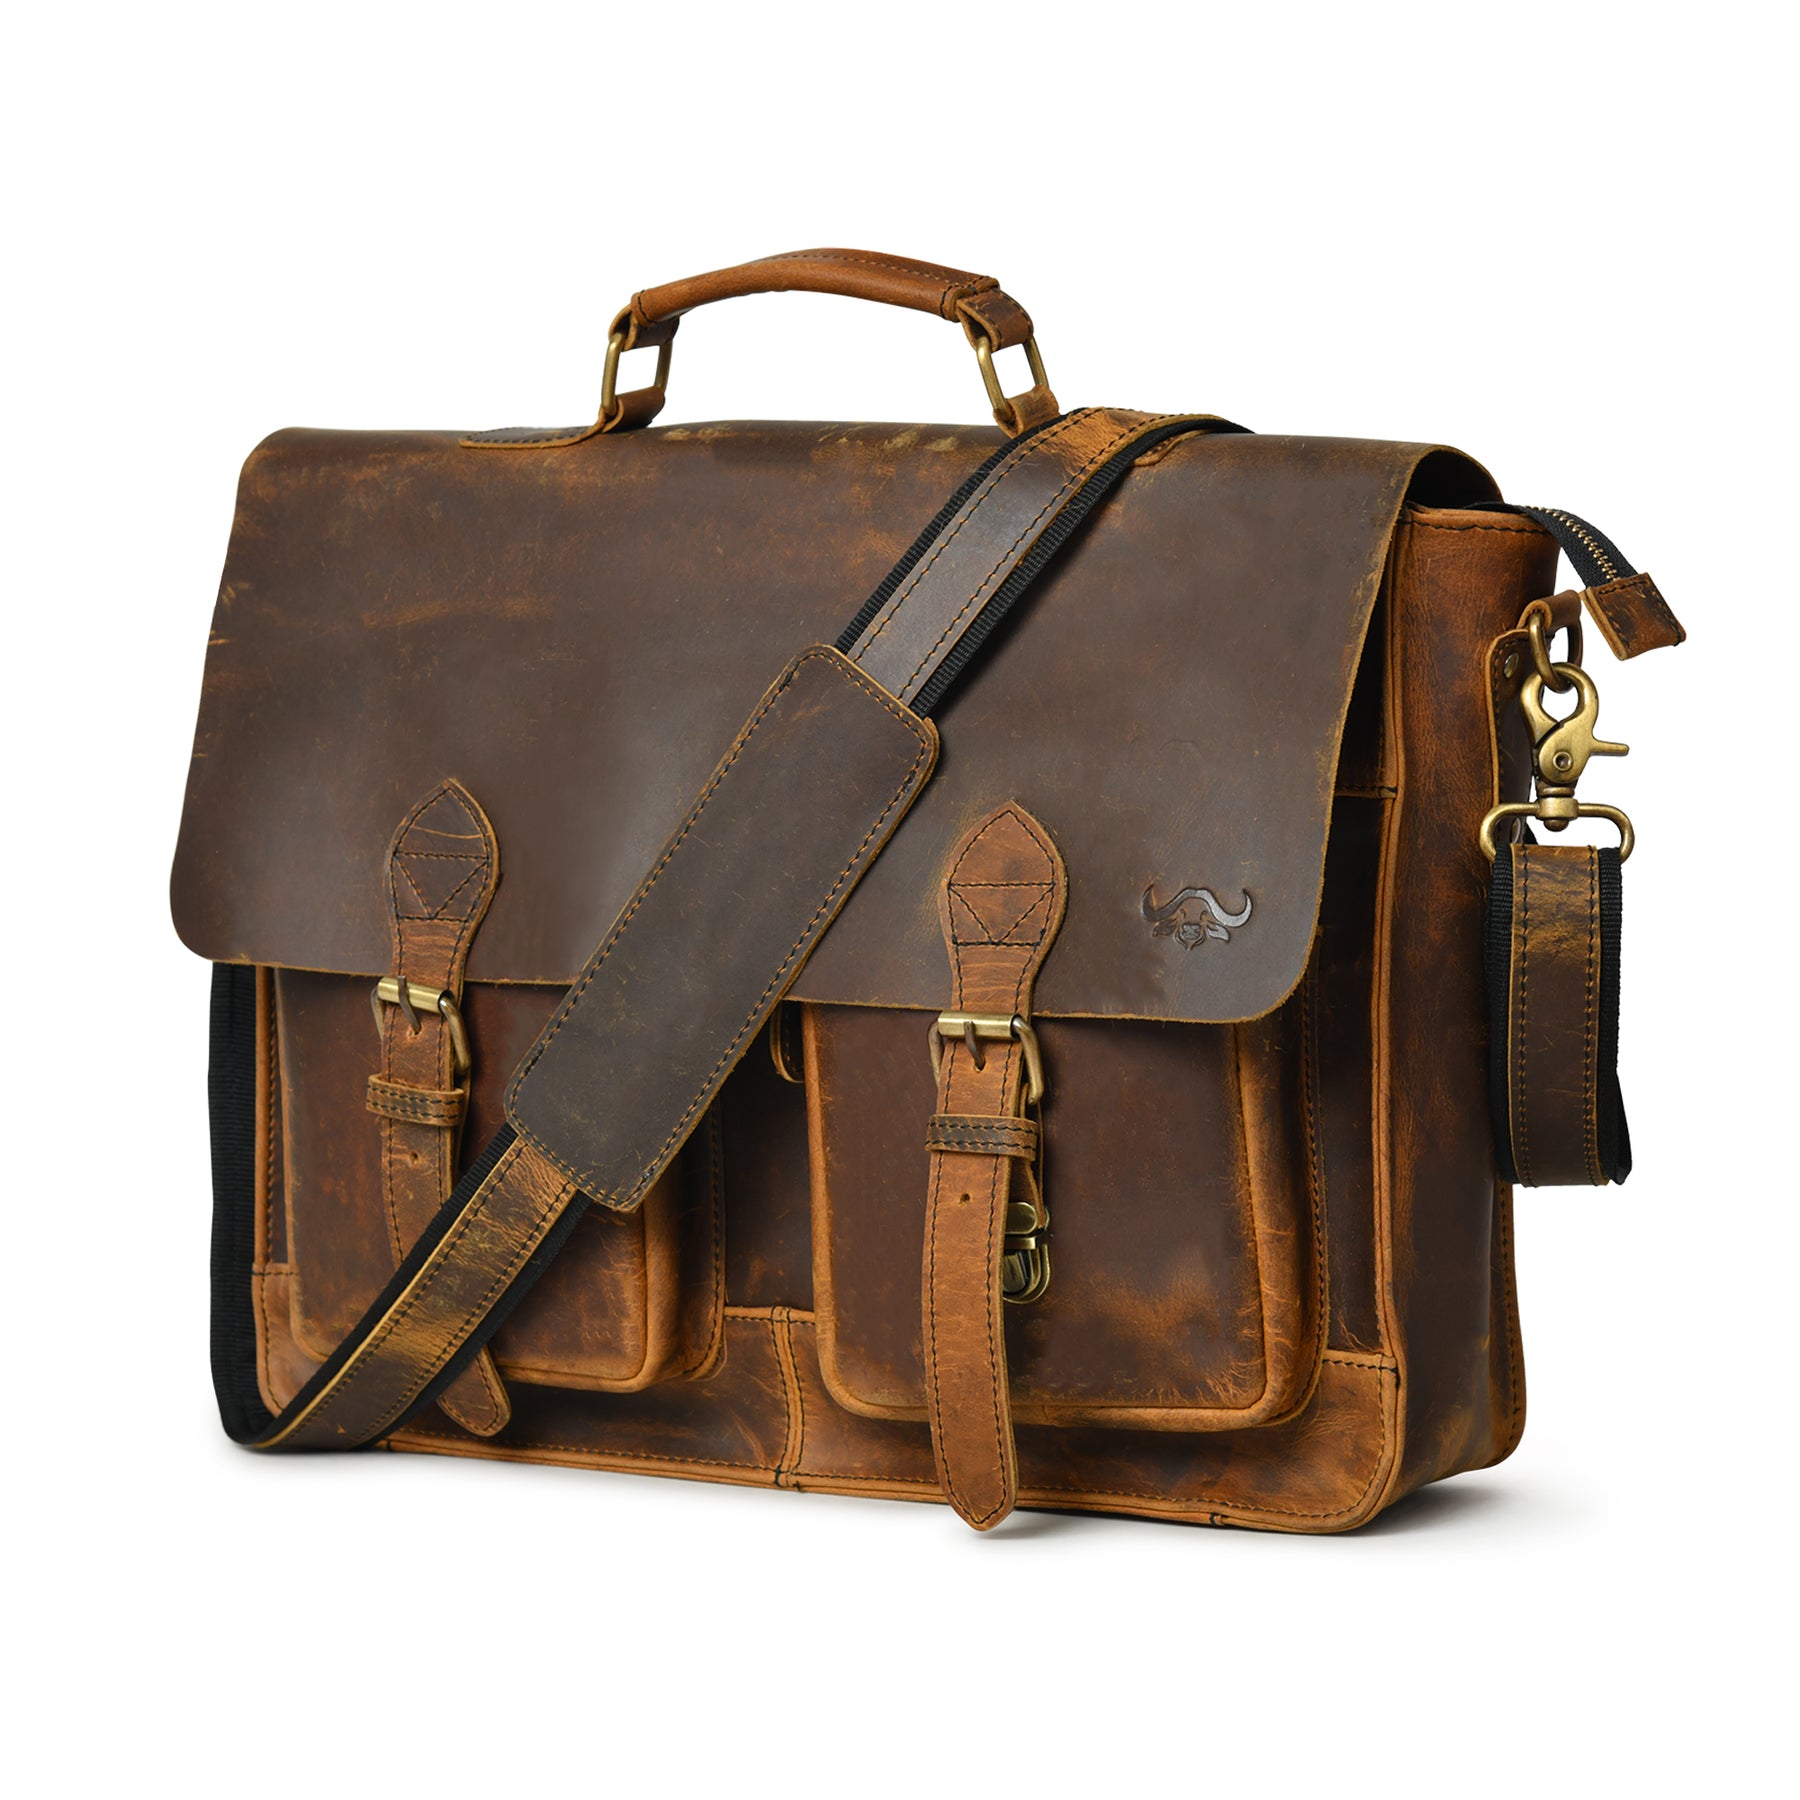 Buy Buffalo Leather Retro Briefcase Online in USA at Lowest Prices ...